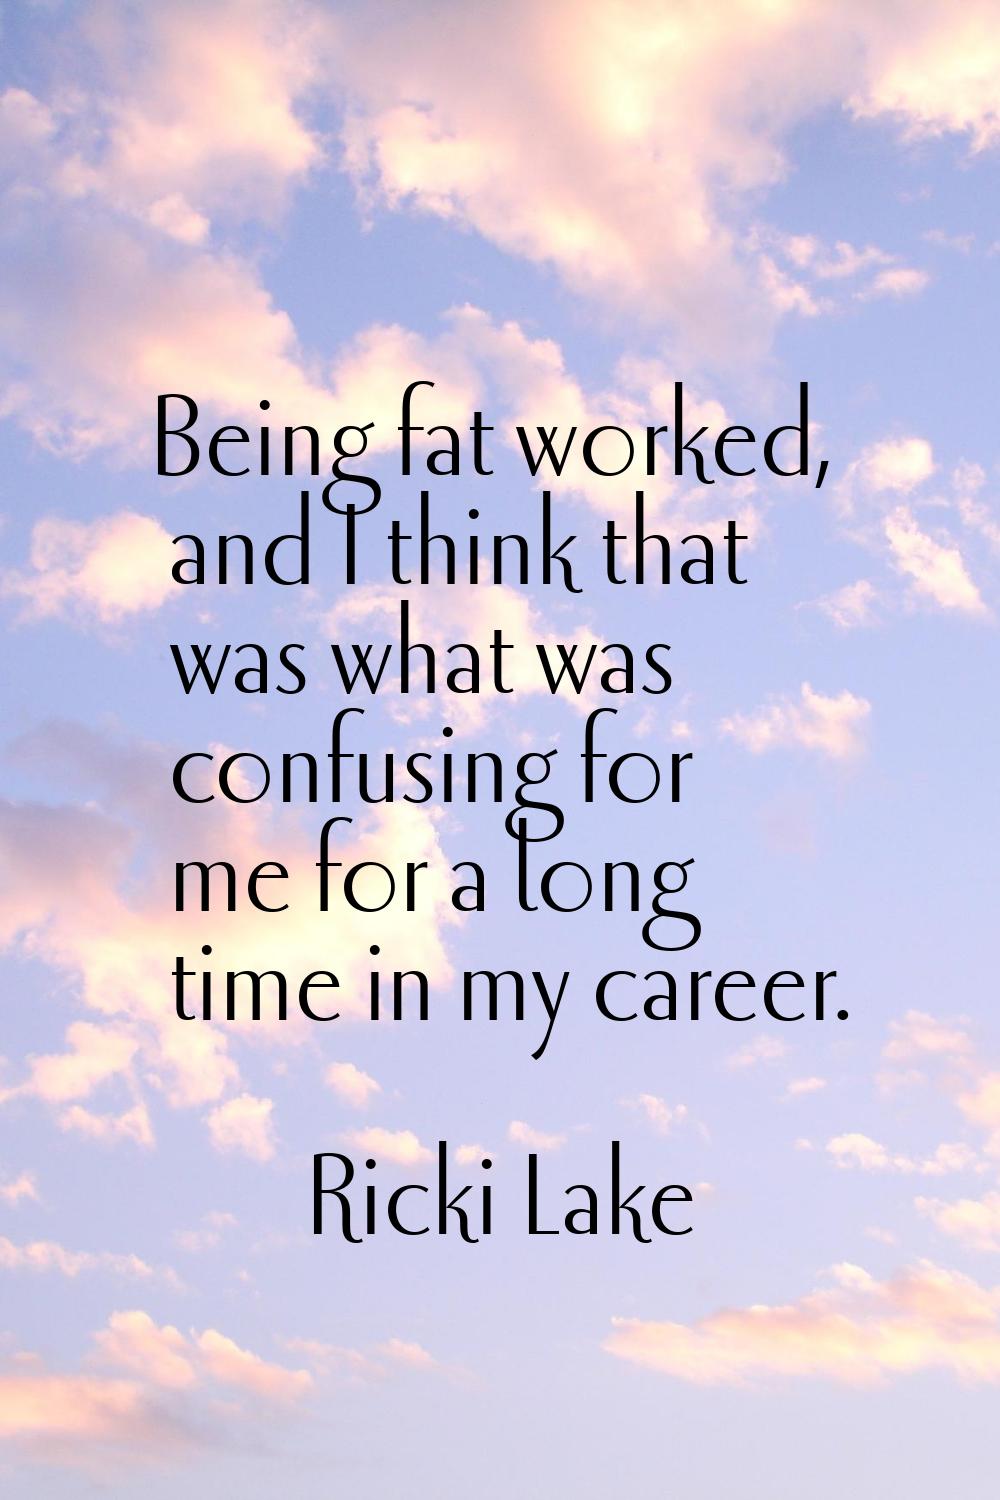 Being fat worked, and I think that was what was confusing for me for a long time in my career.